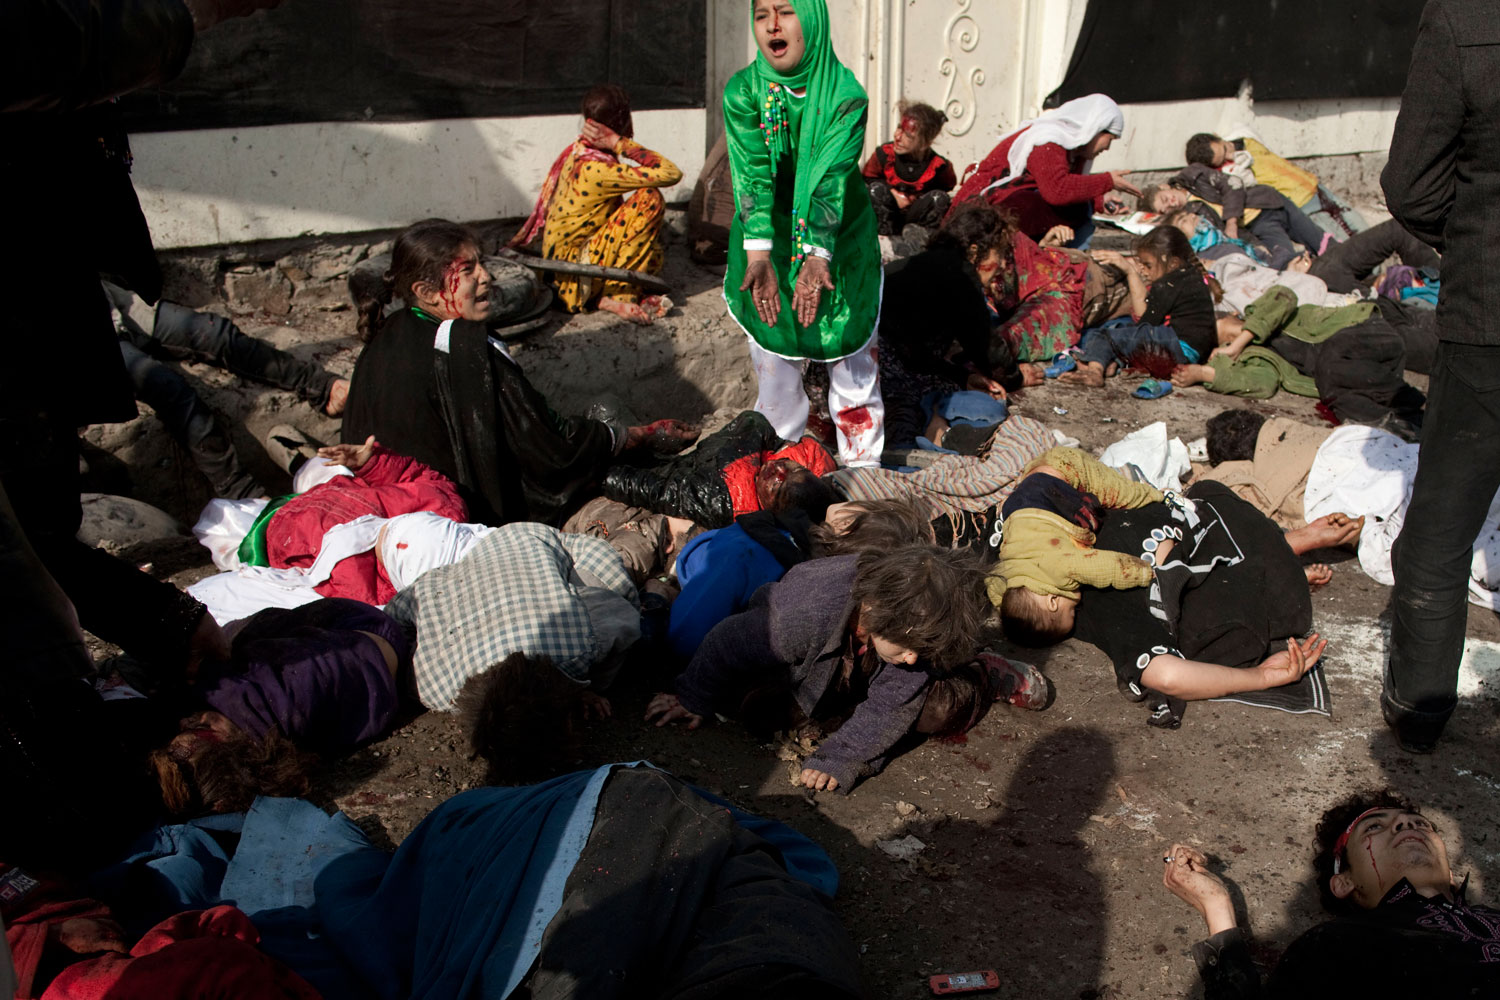 December 6, 2011. Minutes after a blast that killed more than 50 people during the Shiite holy day of Ashura. The explosion happened next to the Abdul Faz mosque, Afghanistan. Kabul, in a crowd watching Hazara Afghans  performing zanjeer--ritual flagellation.